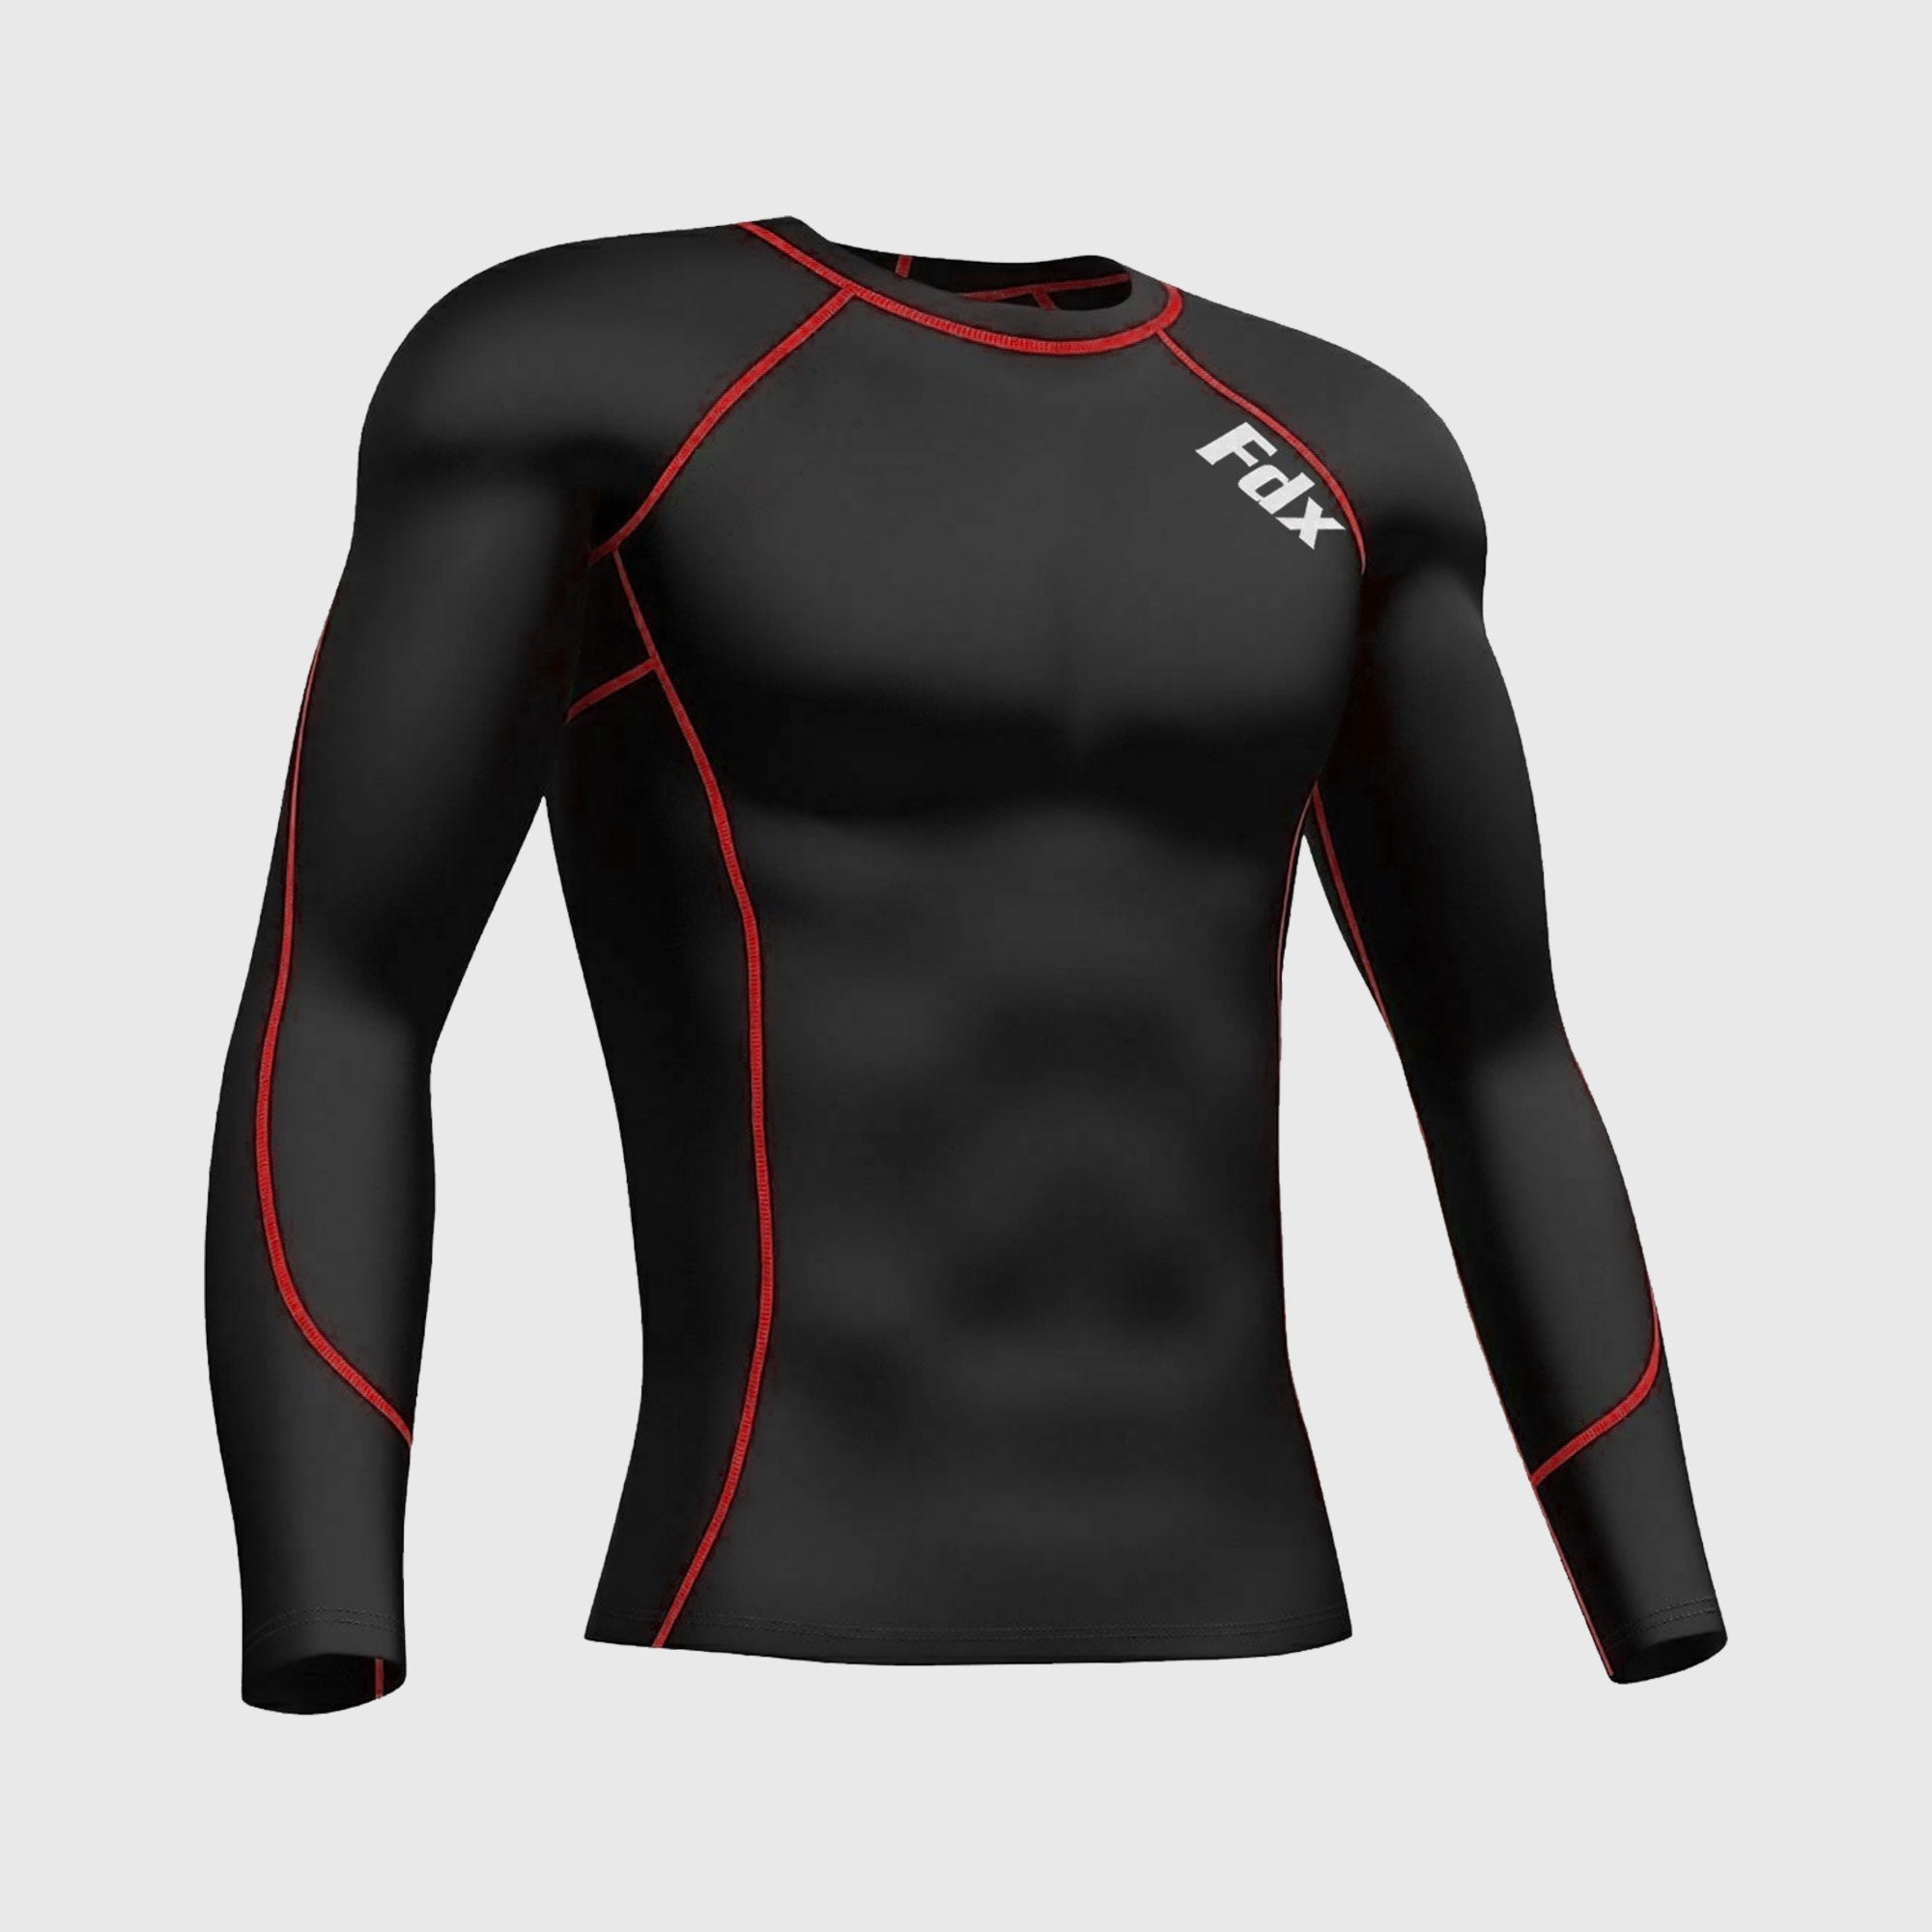 Fdx Men's Black & Red Long Sleeve Compression Top Running Gym Workout Wear Rash Guard Stretchable Breathable - Thermolinx